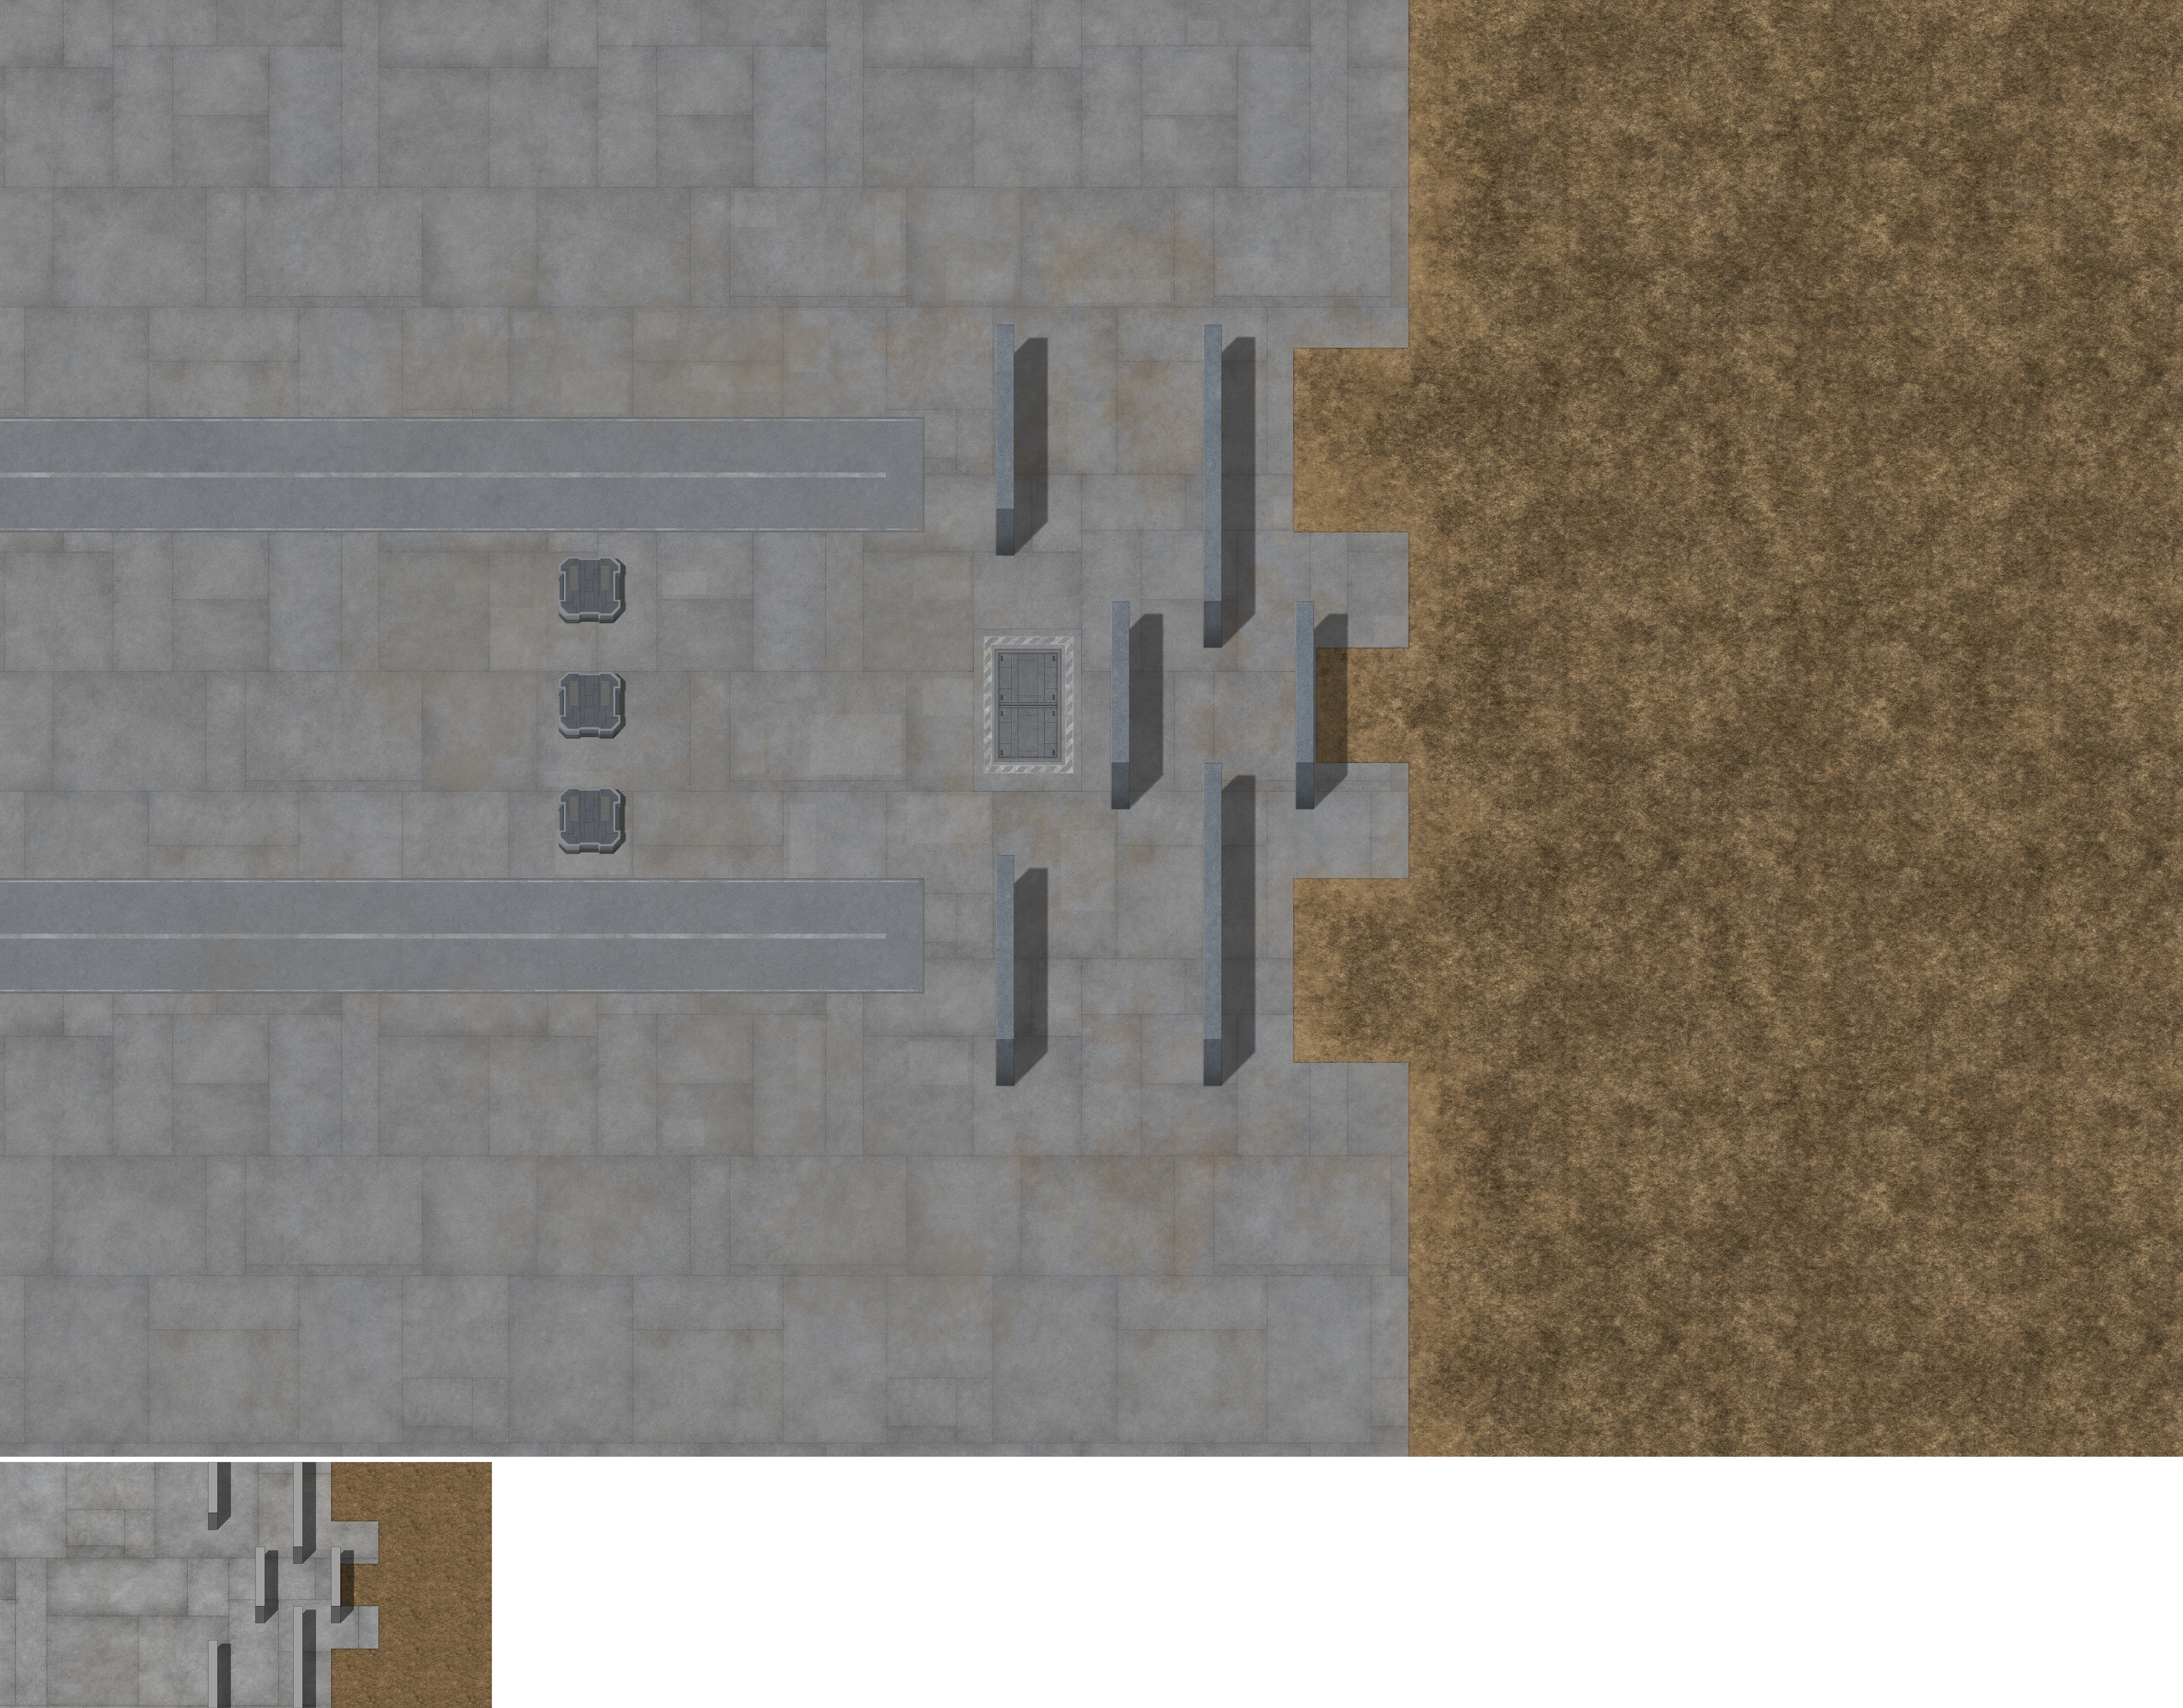 Stage 04: Traitor Code A13 - Missile Base